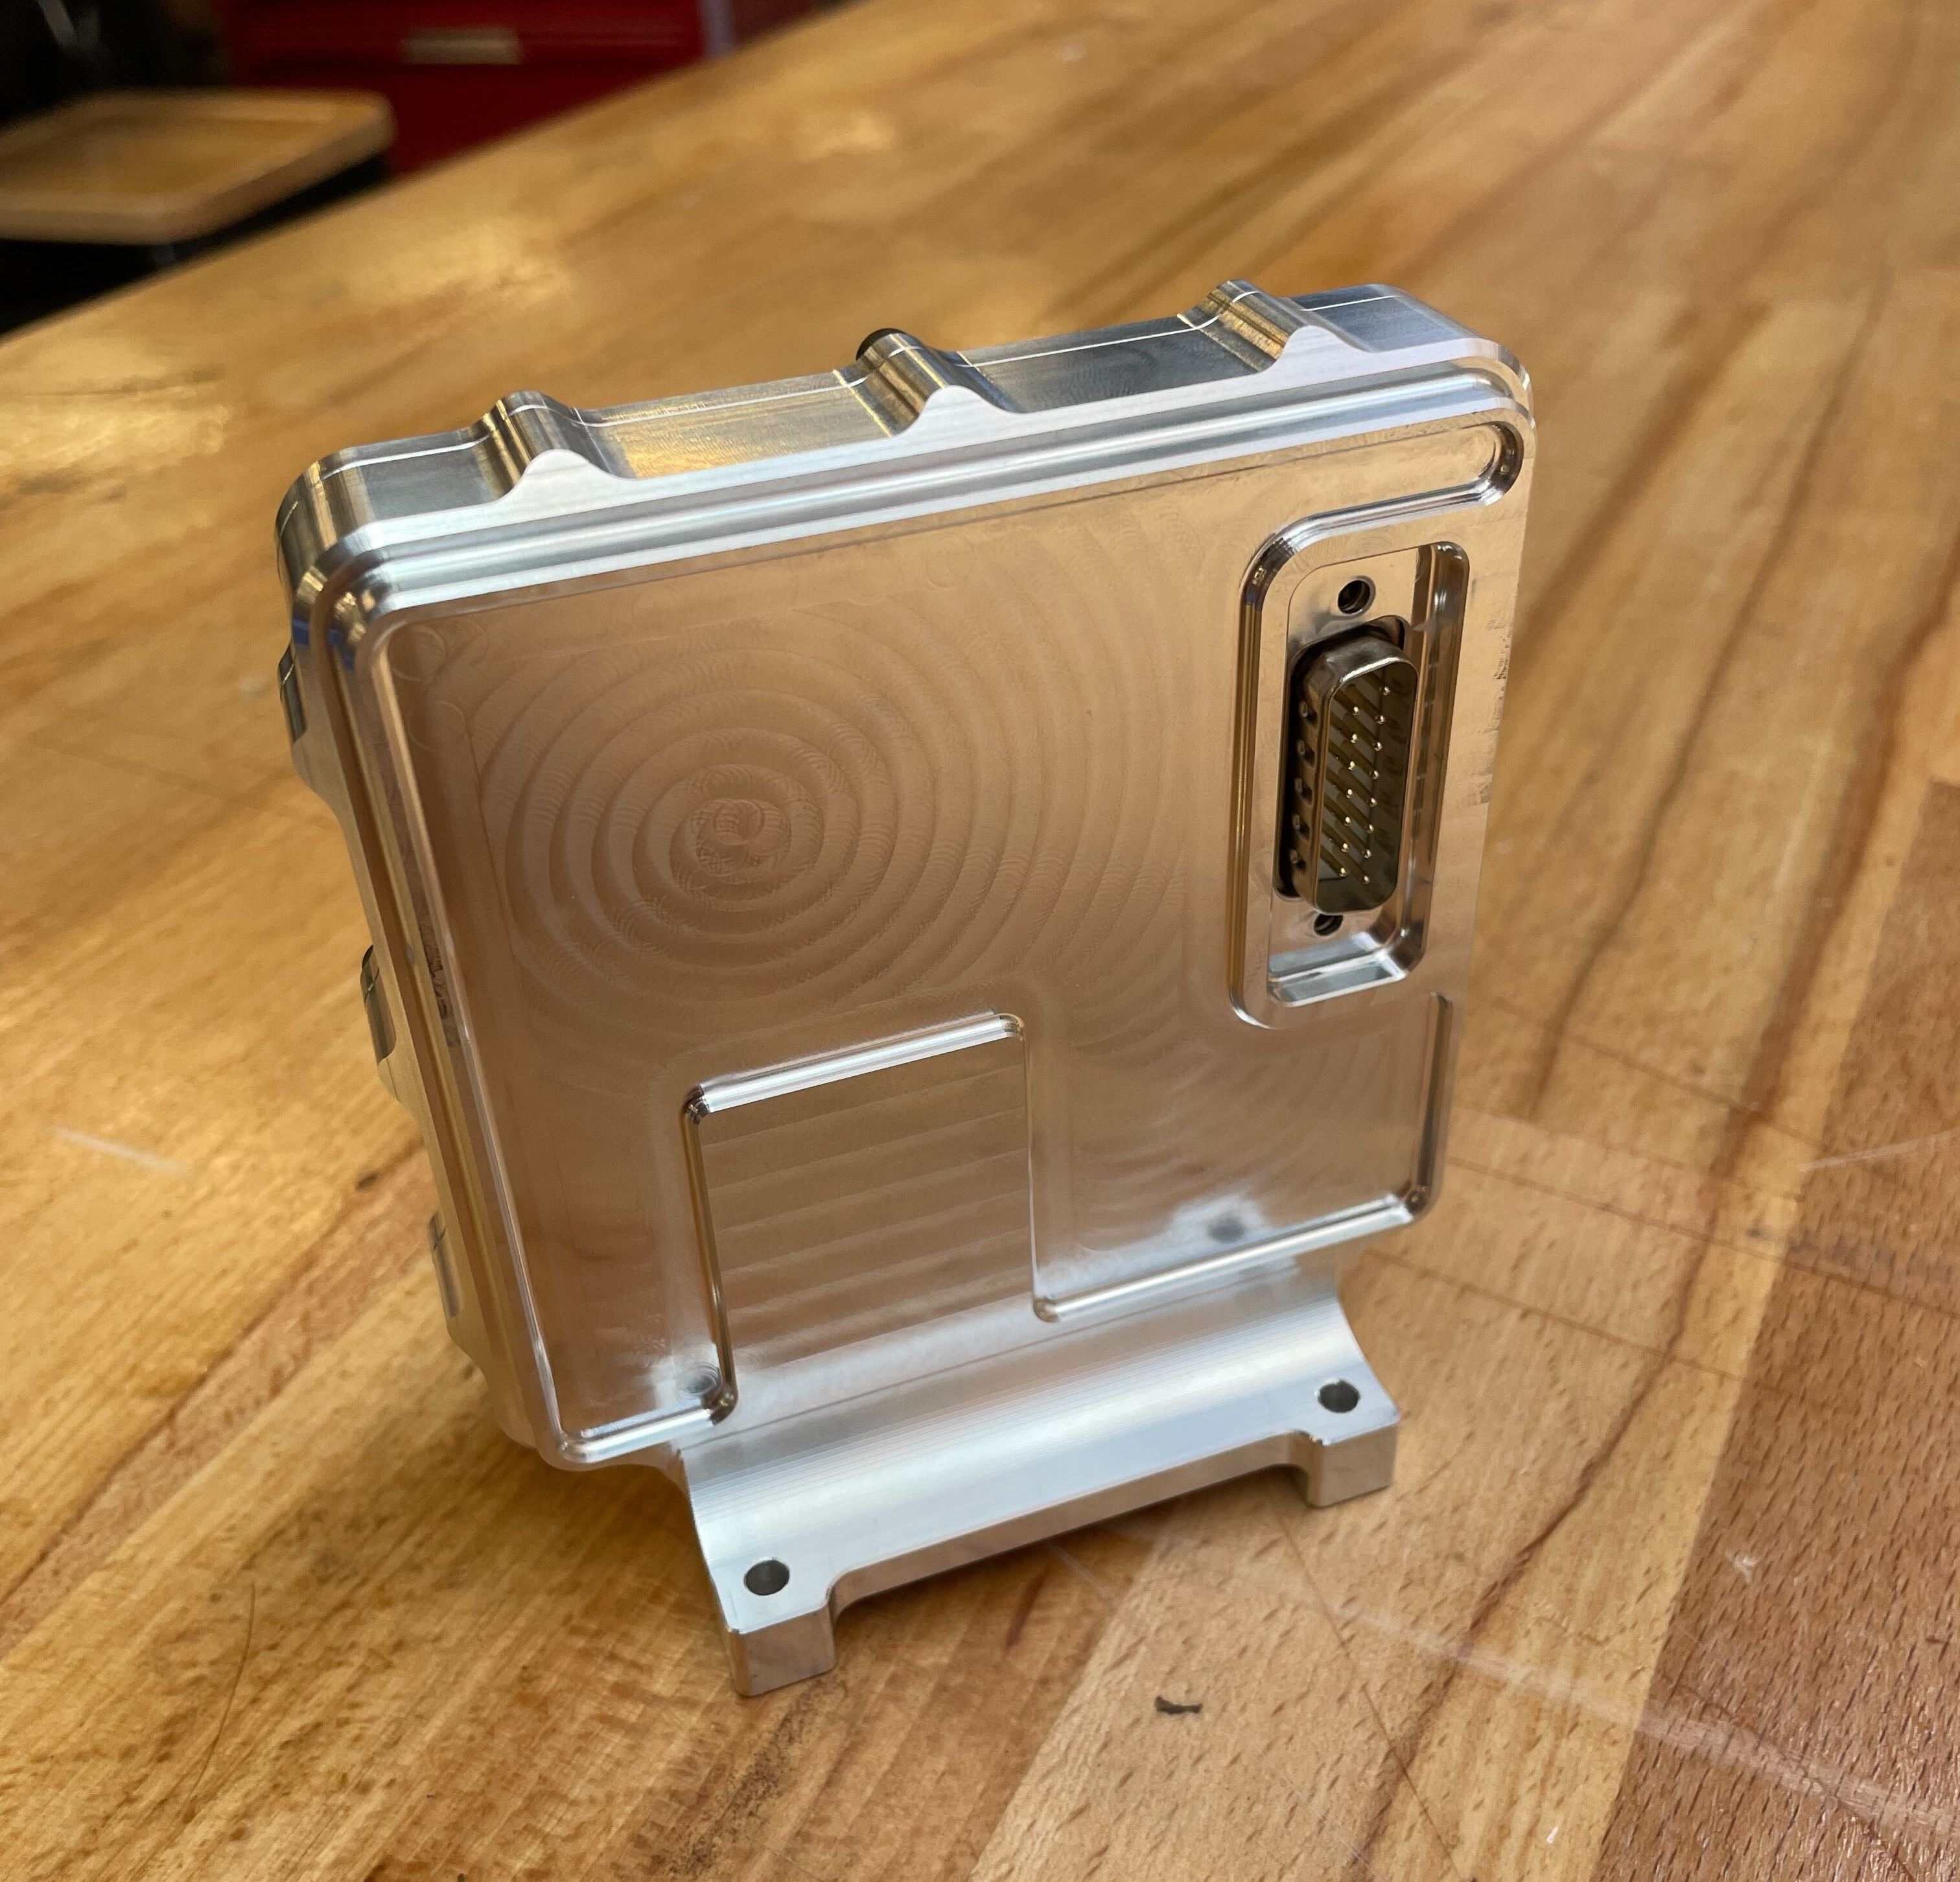 Photo of ANT61 satellite payload enclosure